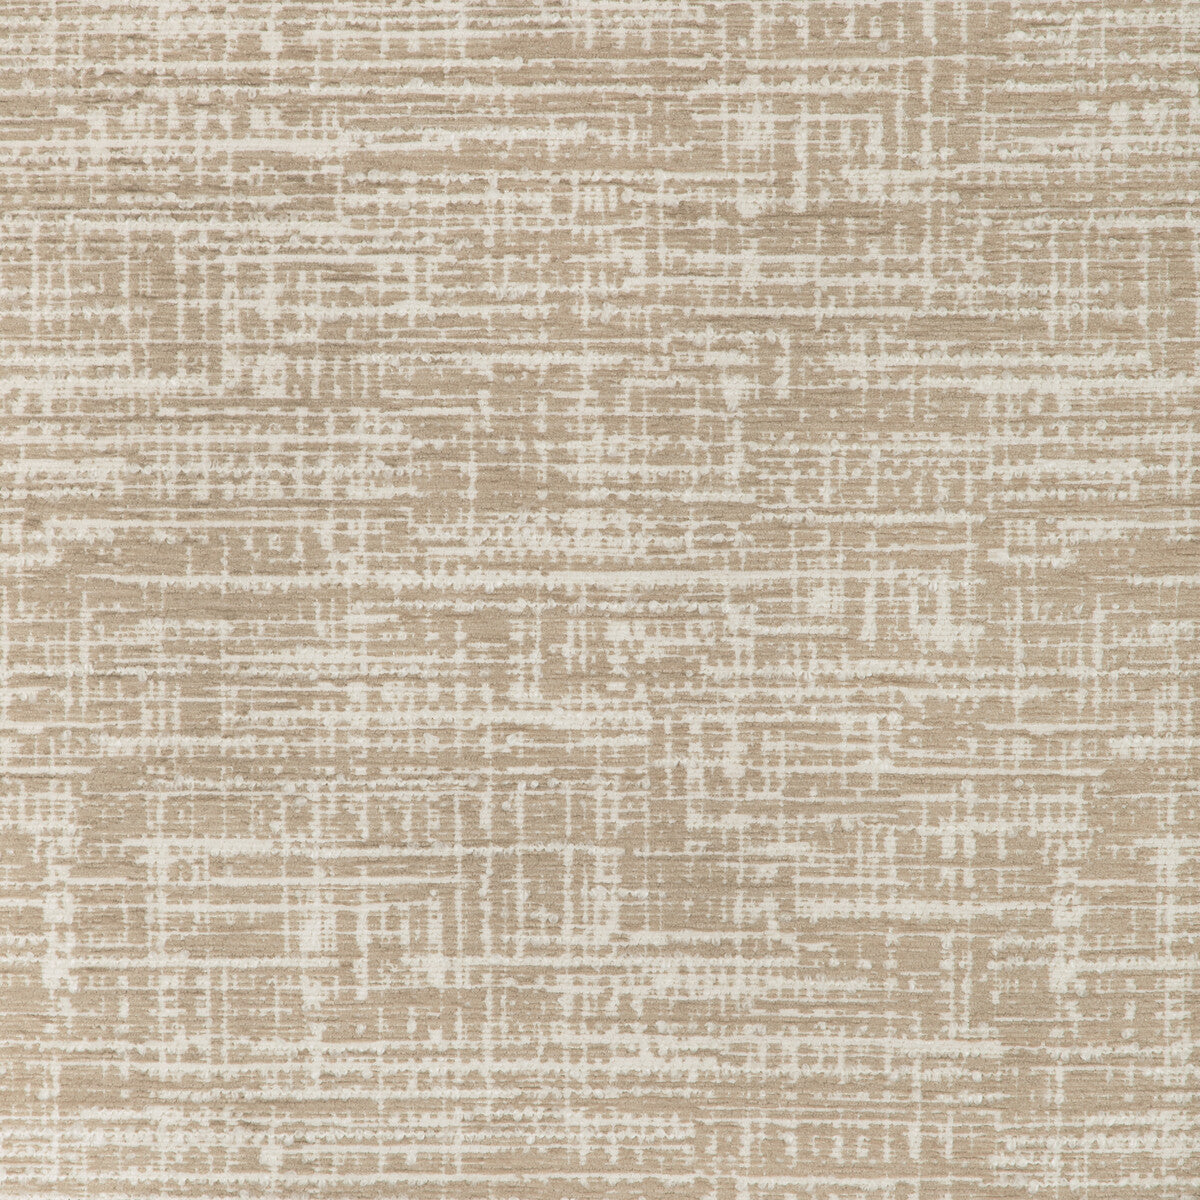 Kravet Design fabric in 37221-16 color - pattern 37221.16.0 - by Kravet Design in the Woven Colors collection